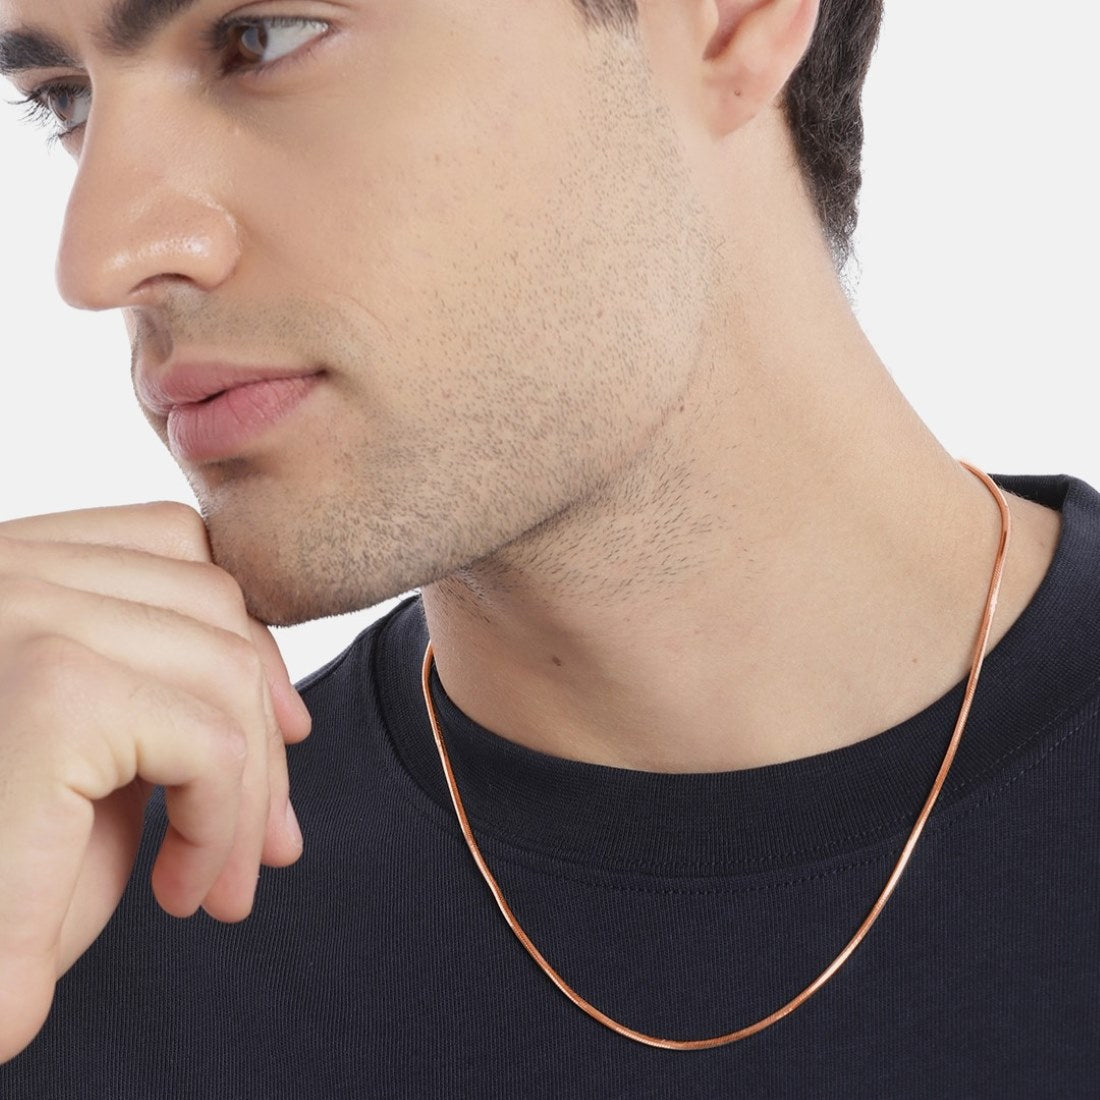 Sleek Serpent 925 Sterling Silver Men's Rose Gold Plated Chain